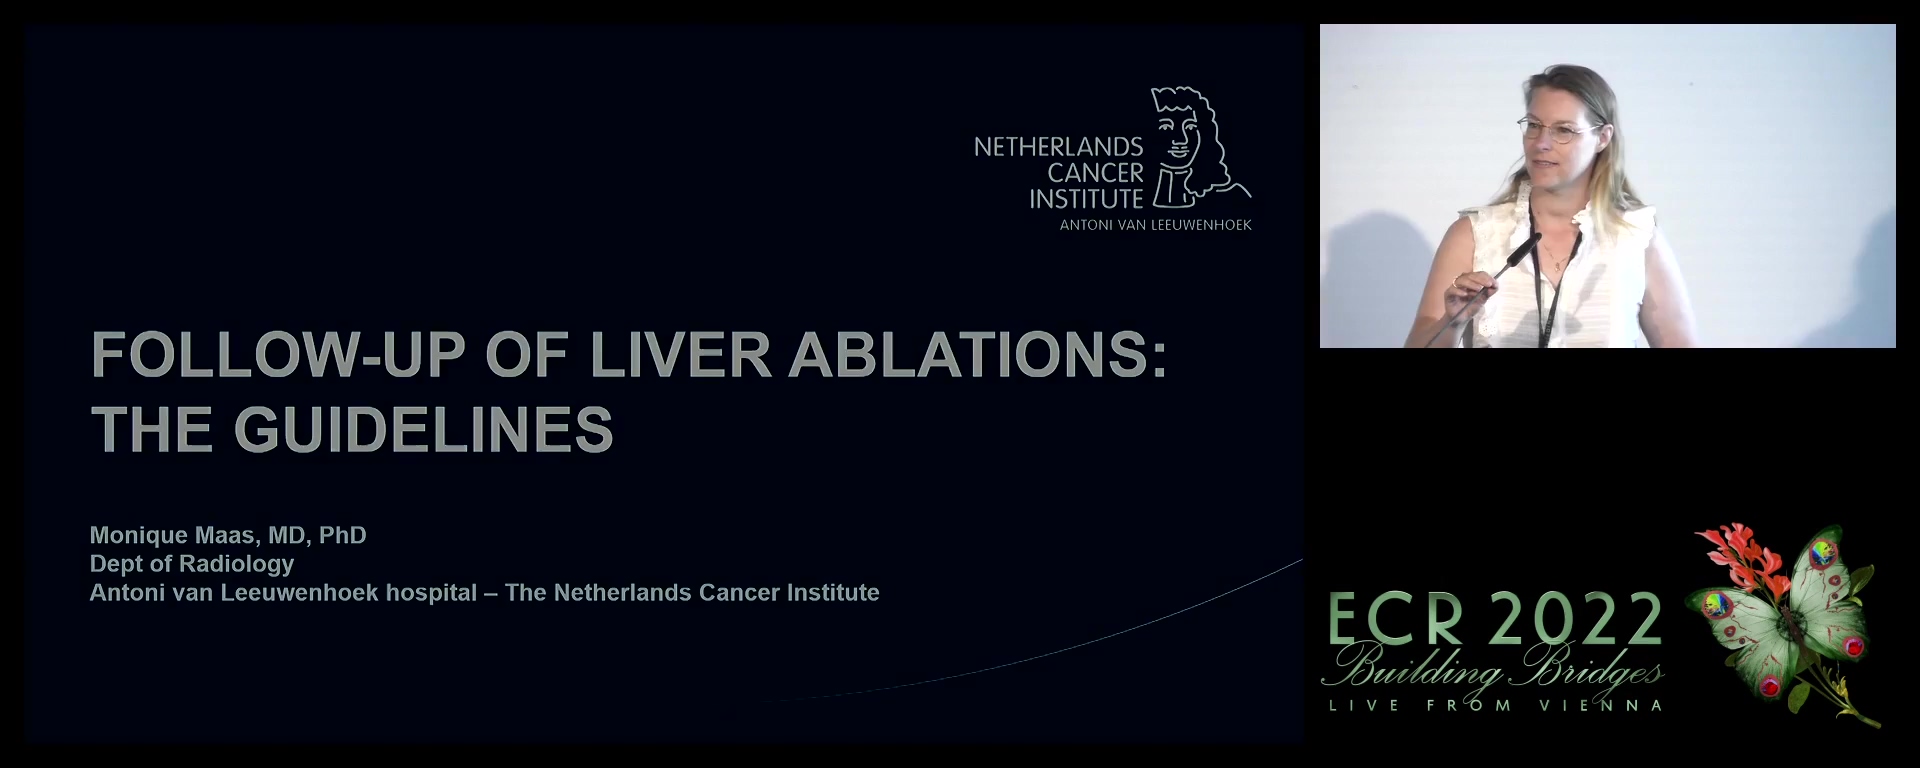 Follow-up of liver ablations: the guidelines - Monique Maas, Amsterdam / NL